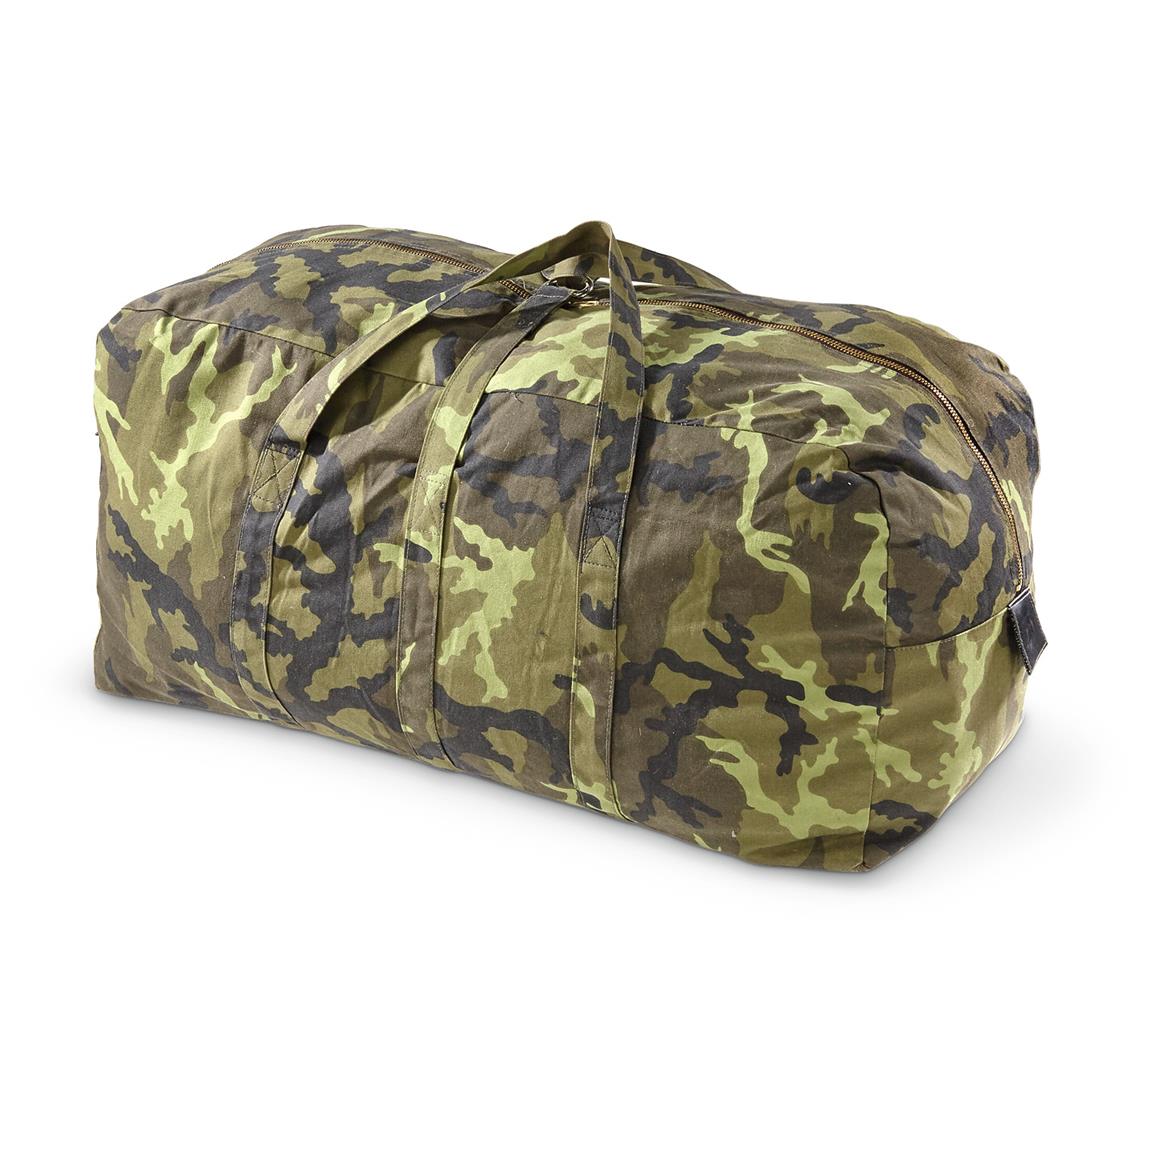 Czech Military Issue Duffel Bag, Woodland Camo, Used - 608459, Military & Camo Duffle Bags at ...